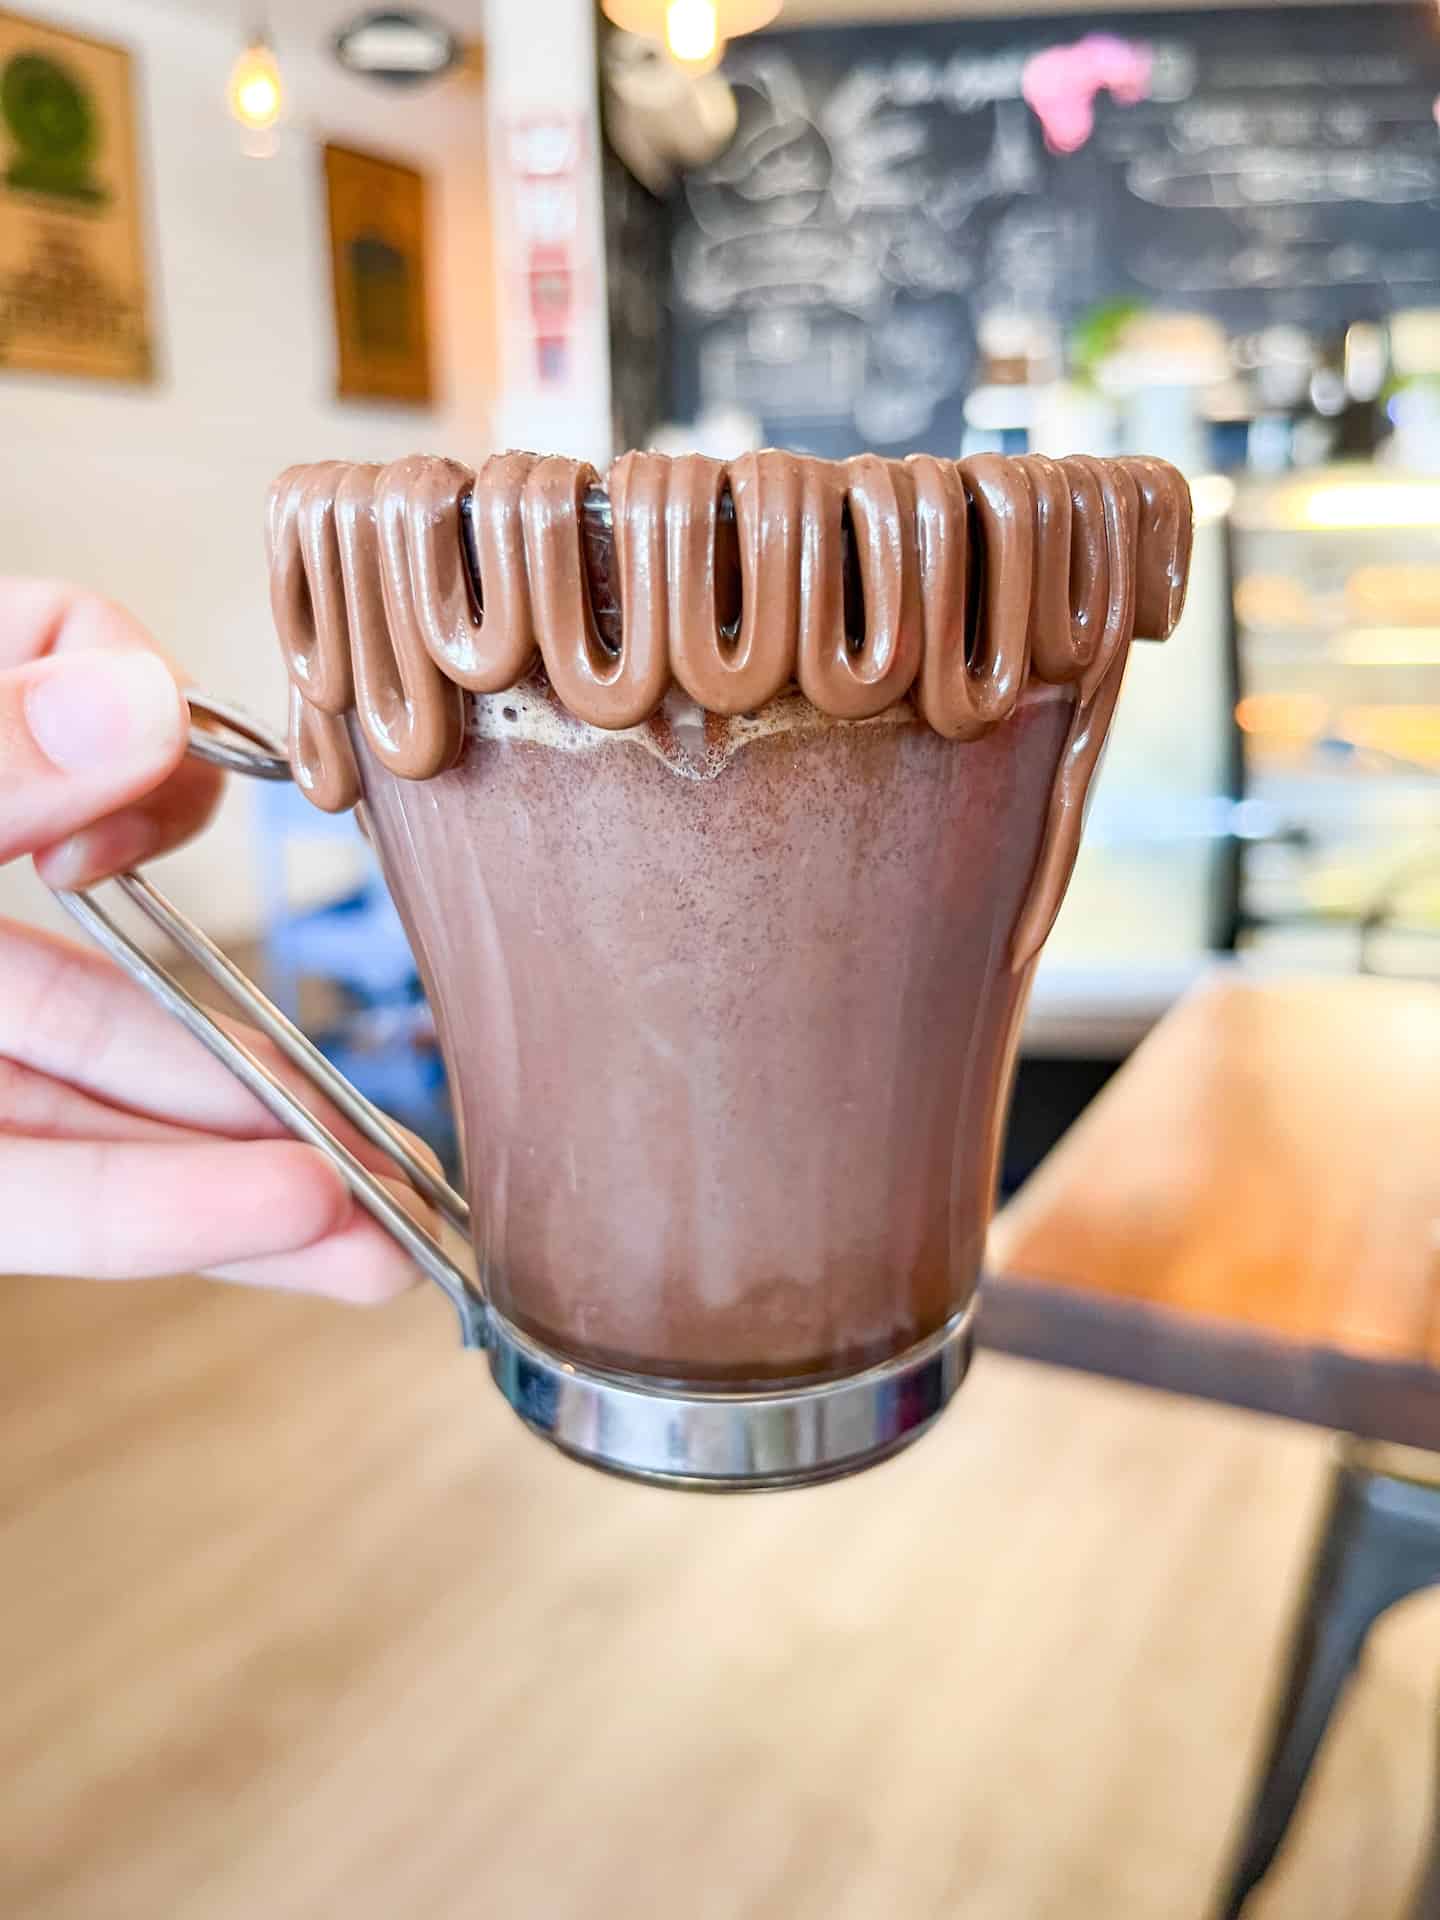 A nutella hot chocolate that is delicious and puts La Boulangerie Boul'mich on the list of most instagrammable restaurants in Miami.